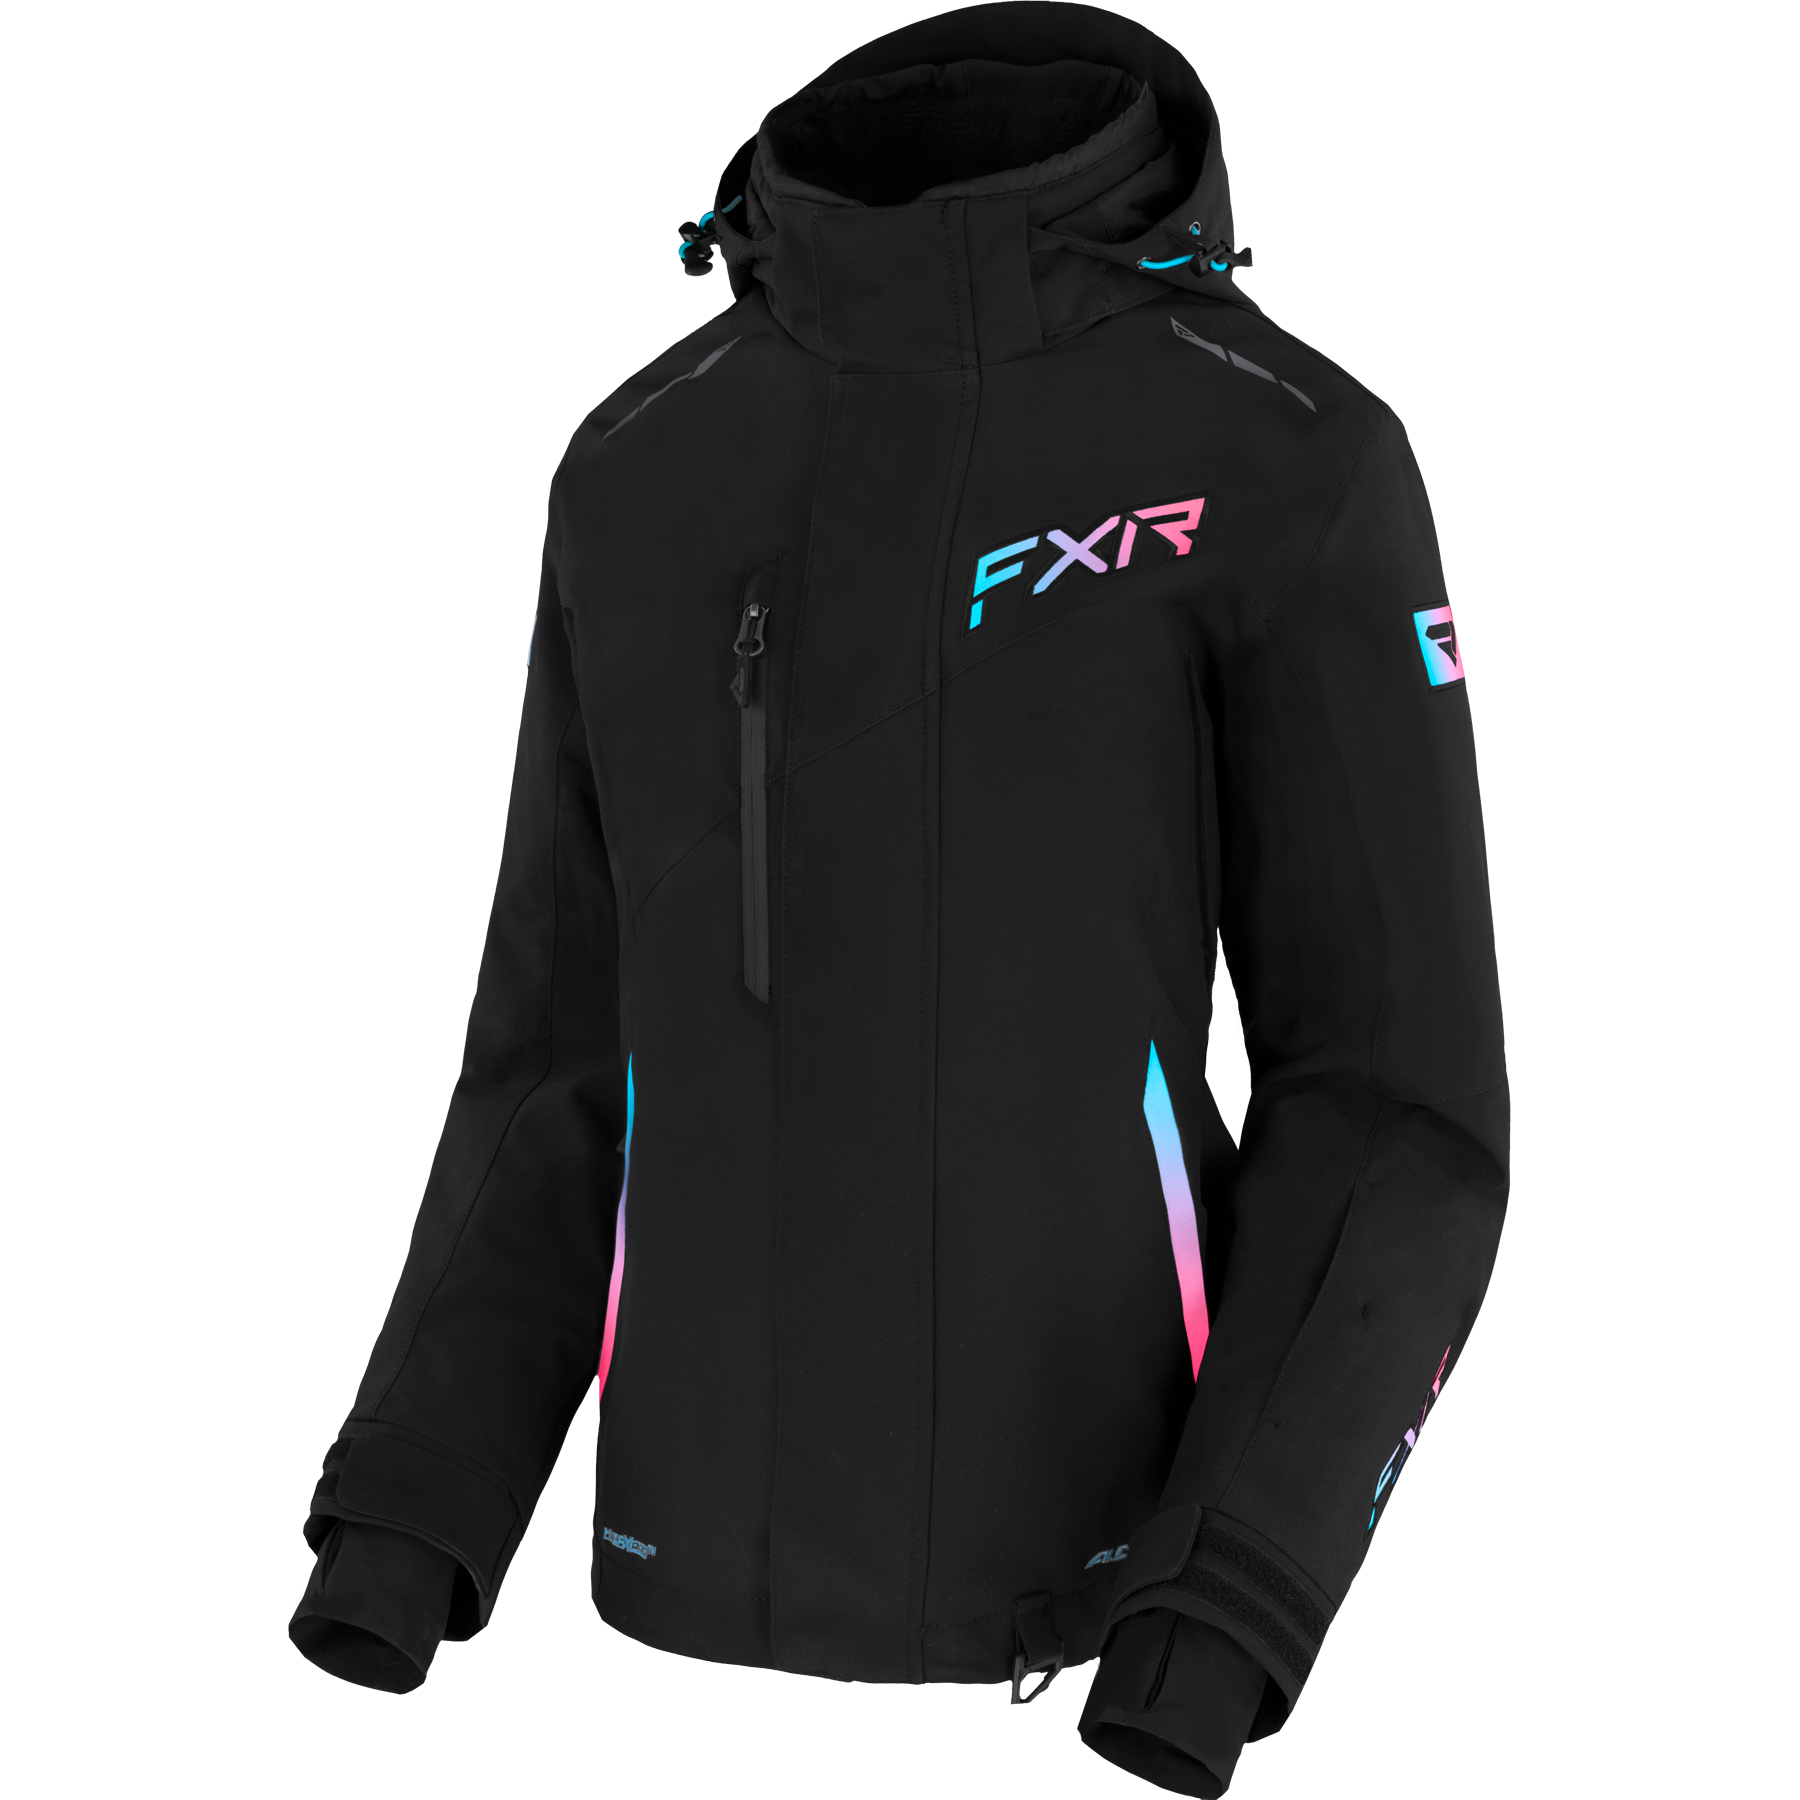 fxr racing jackets  edge insulated - snowmobile